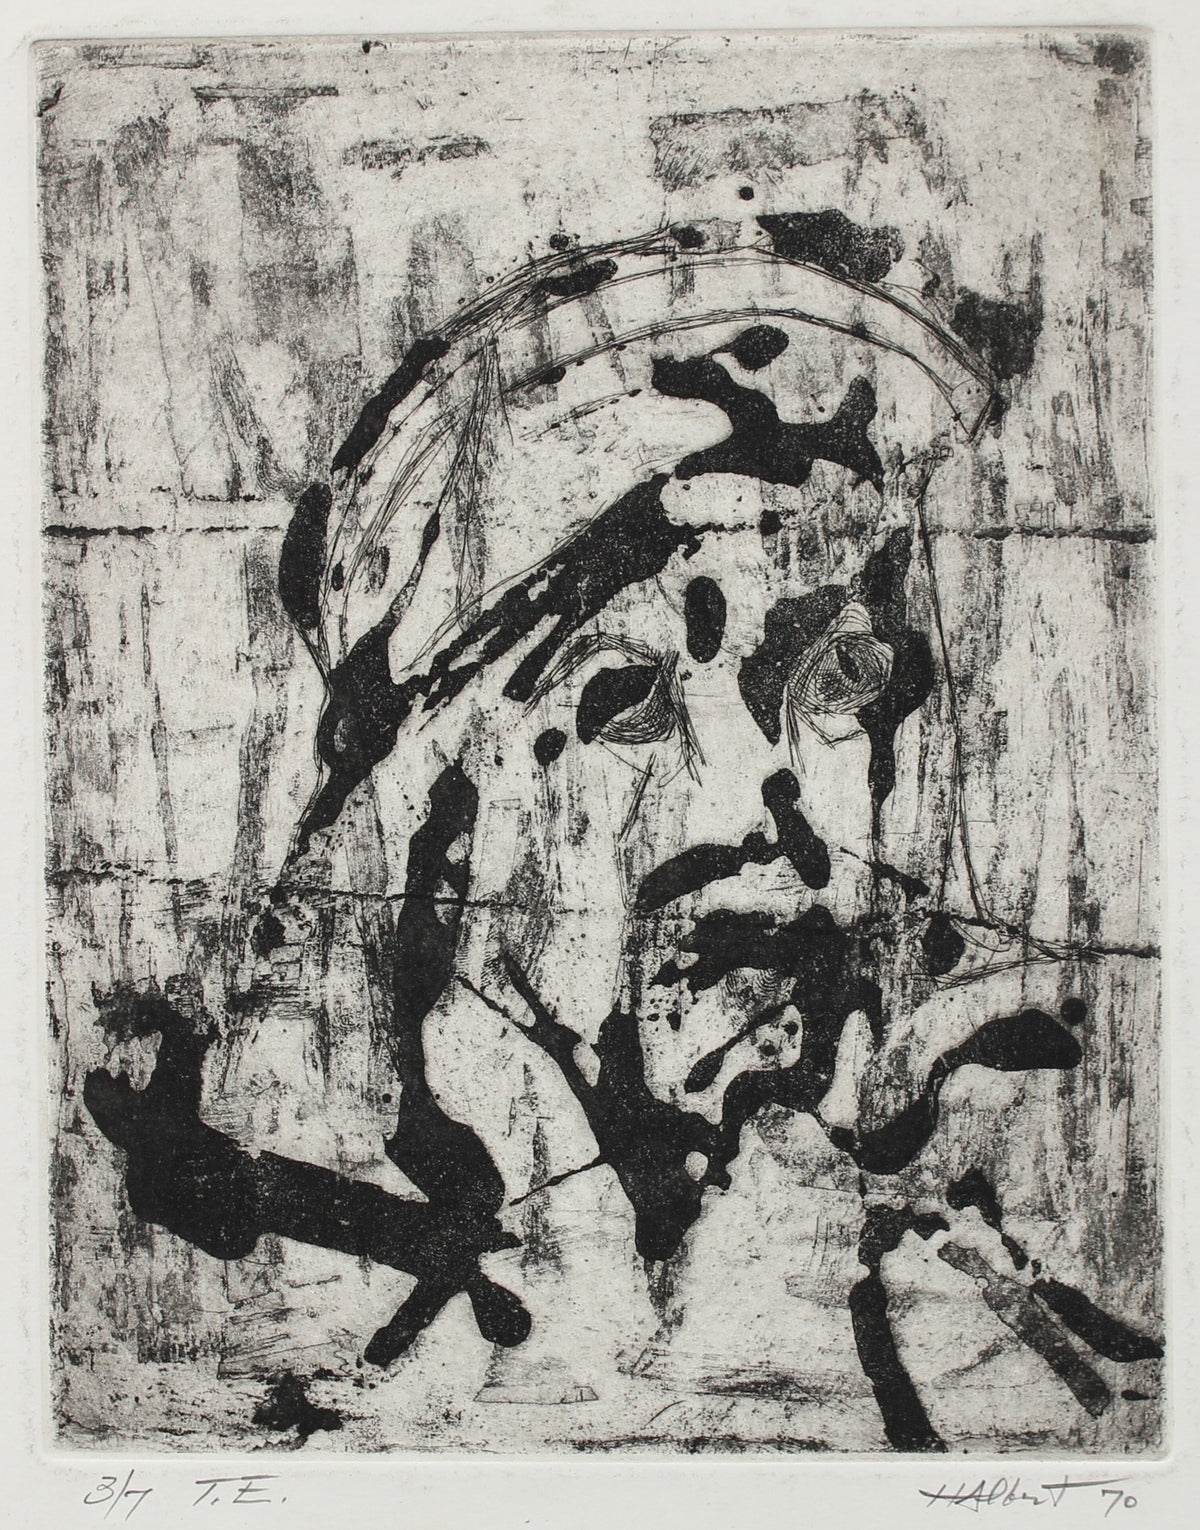 &lt;i&gt;T.E.&lt;/i&gt;, 3/7&lt;br&gt;1970 Woodcut&lt;br&gt;&lt;br&gt;#2193